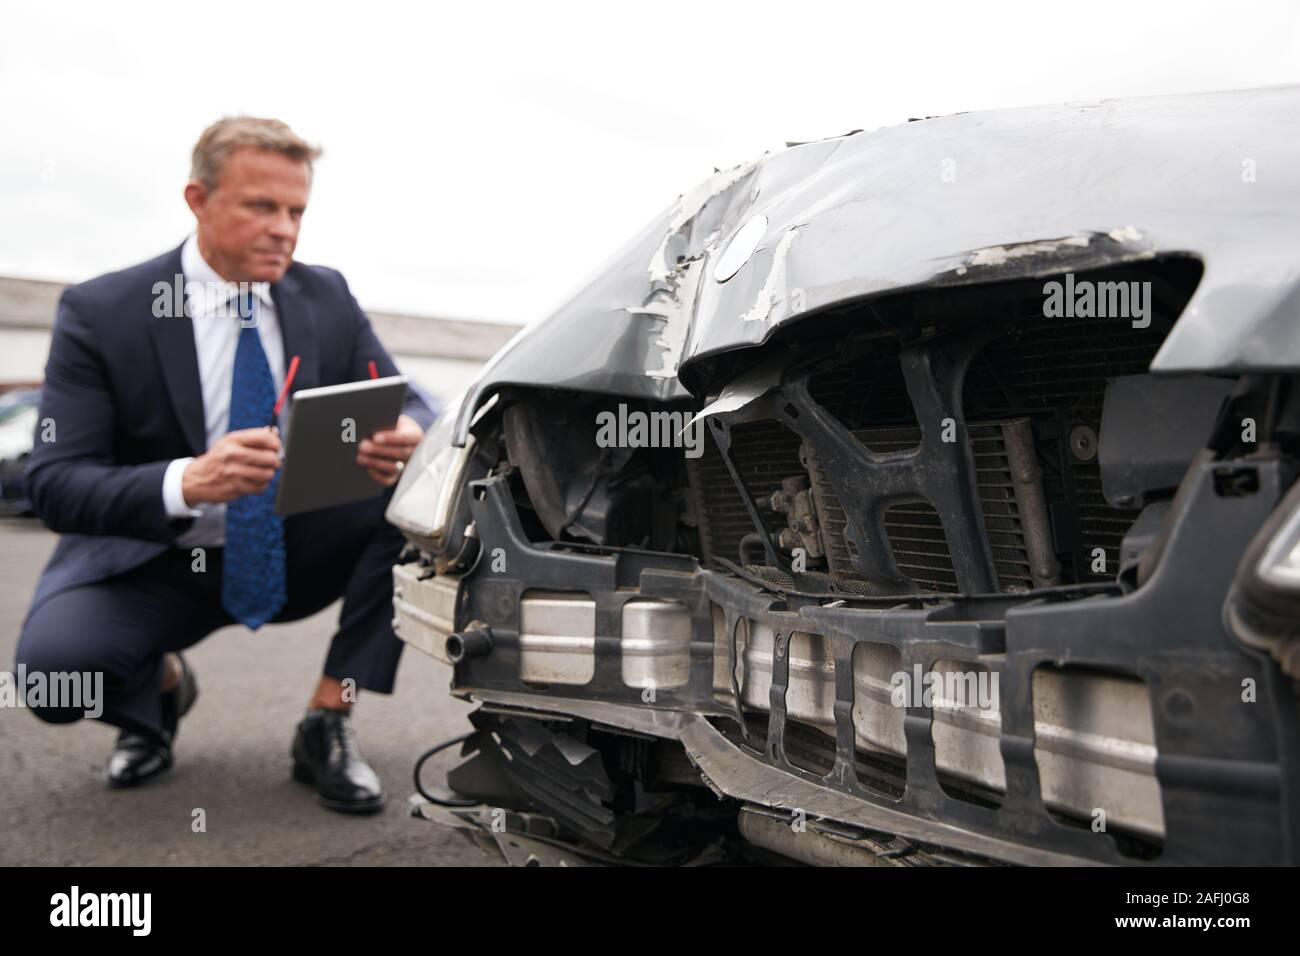 Male Insurance Loss Adjuster With Digital Tablet Inspecting Damage To Car From Motor Accident Stock Photo